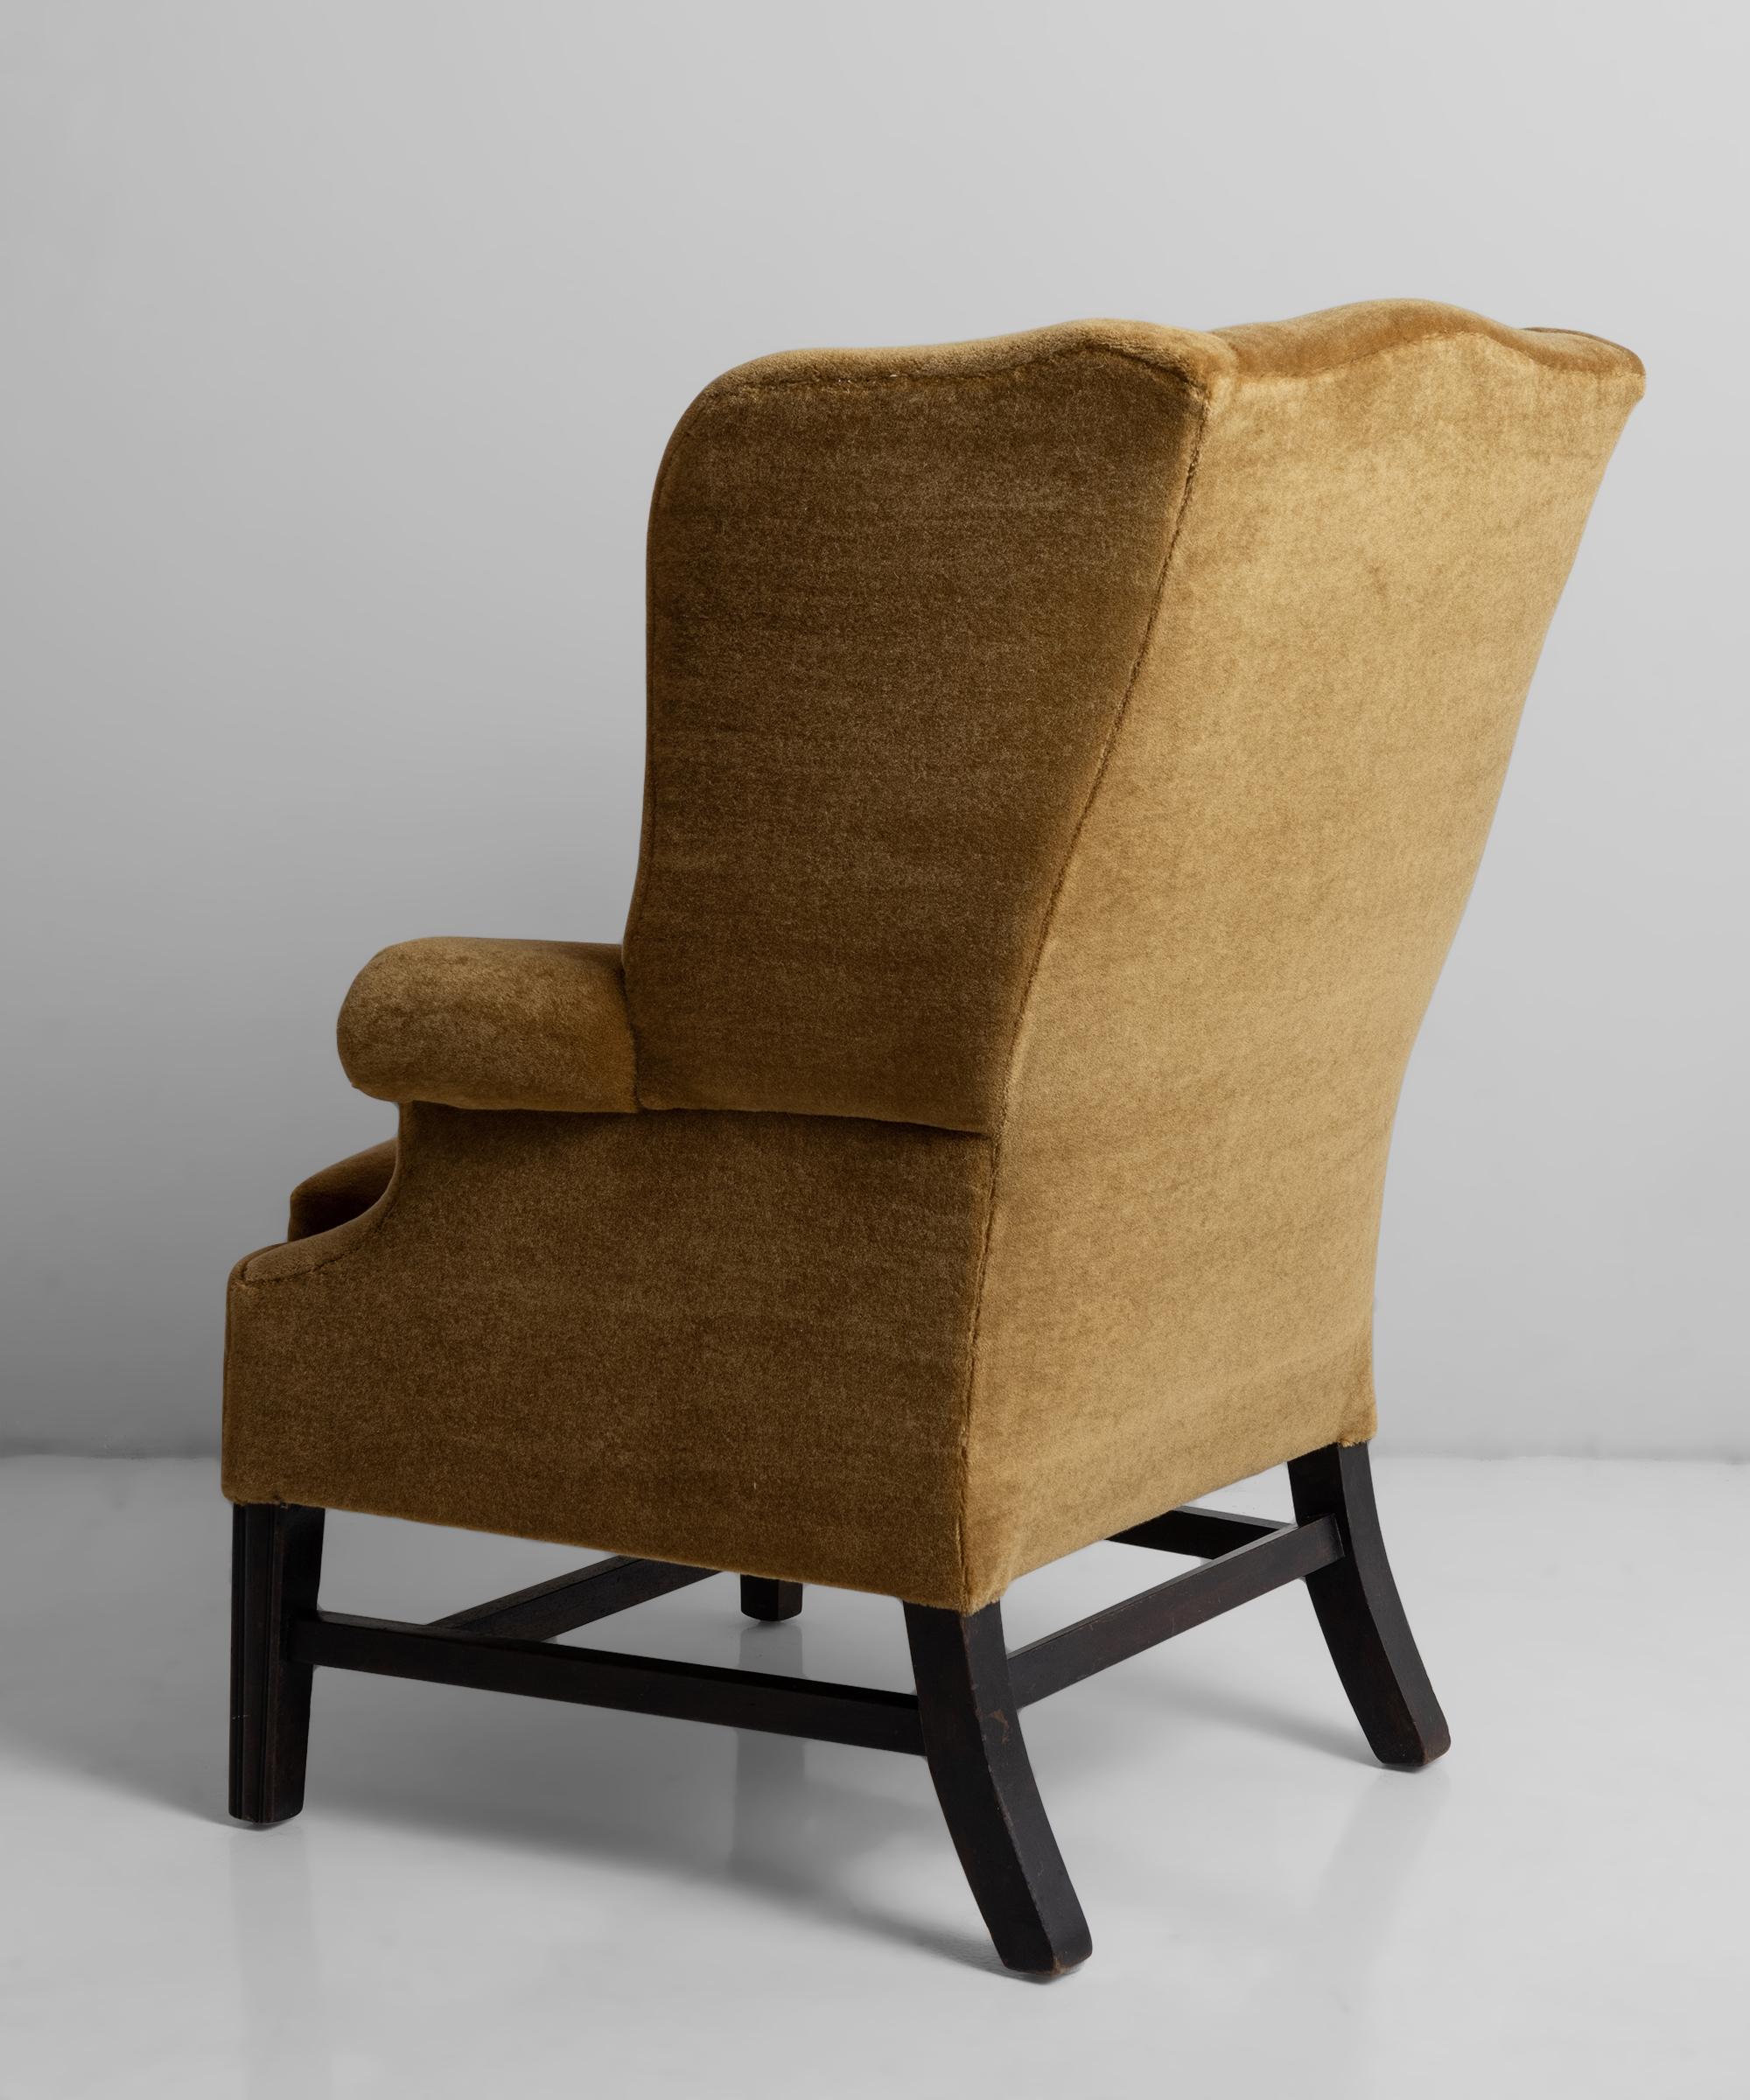 English Wingchair in Teddy Mohair by Pierre Frey 'Moutarde' England, circa, 1880